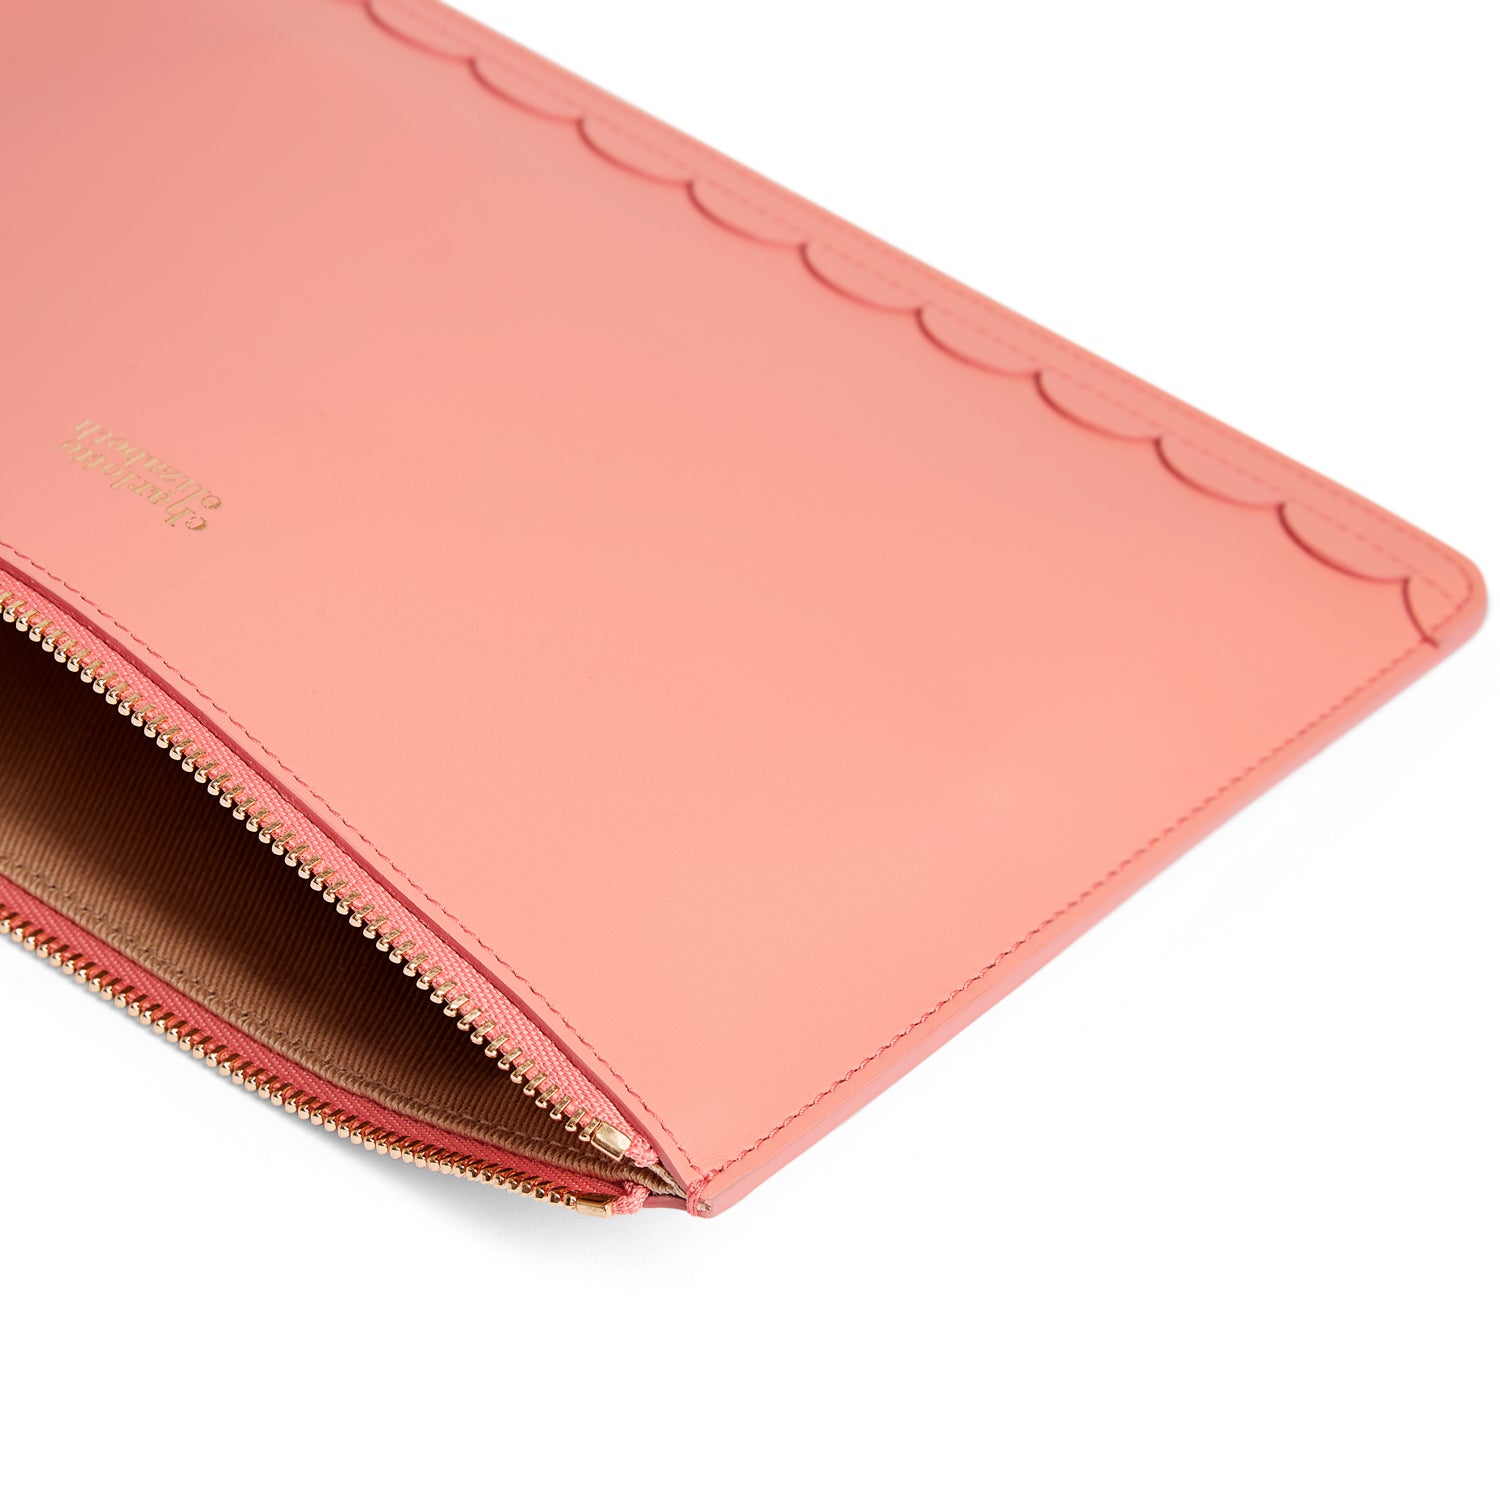 scallop trim detail pink luxury accessories for women cute pouch for phone and ipad mini